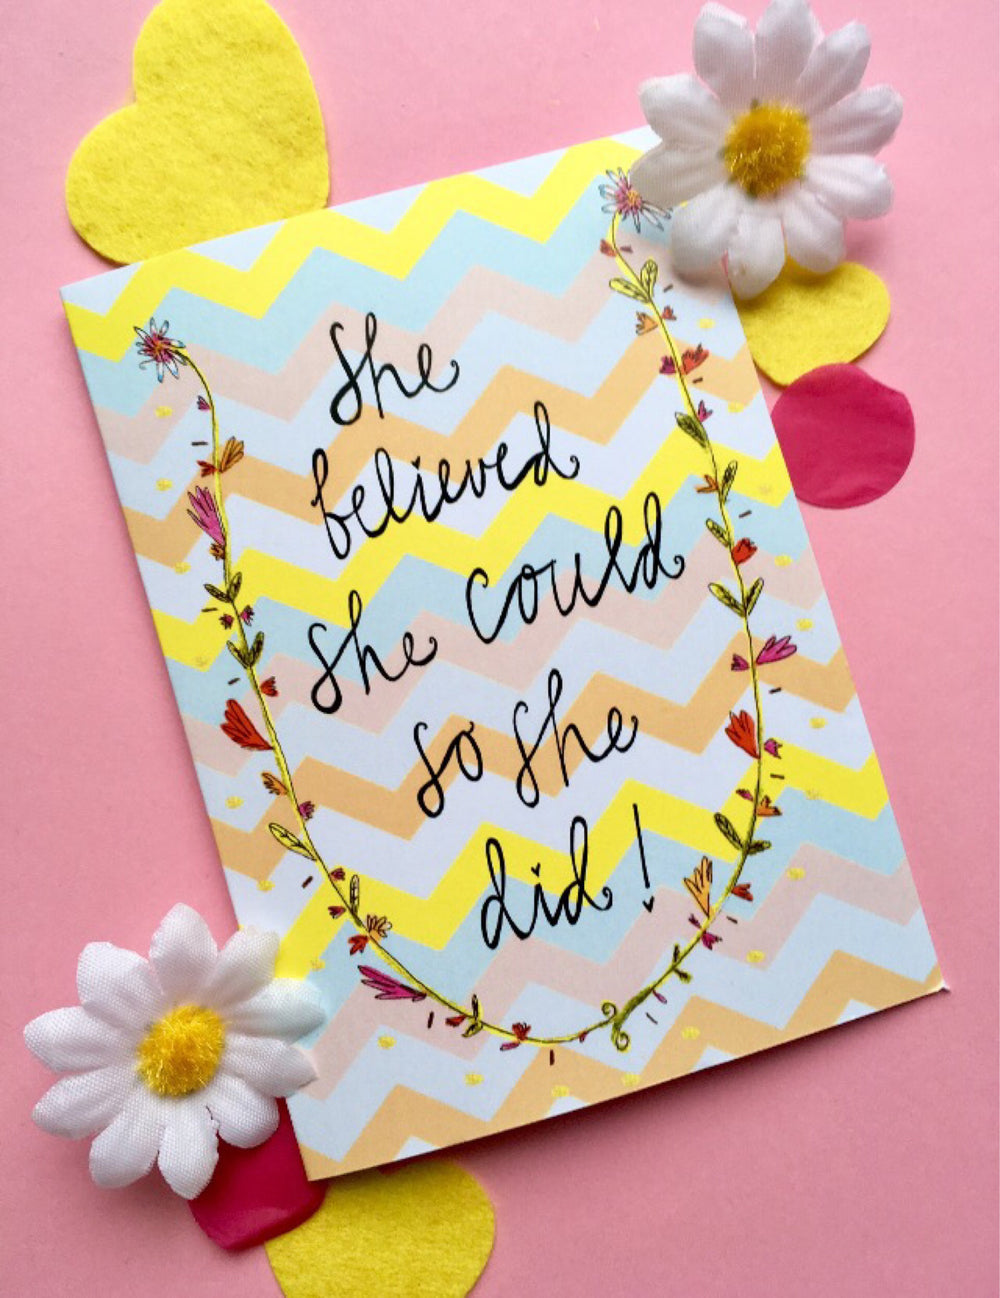 She Believed She Could So She Did! Greetings Card